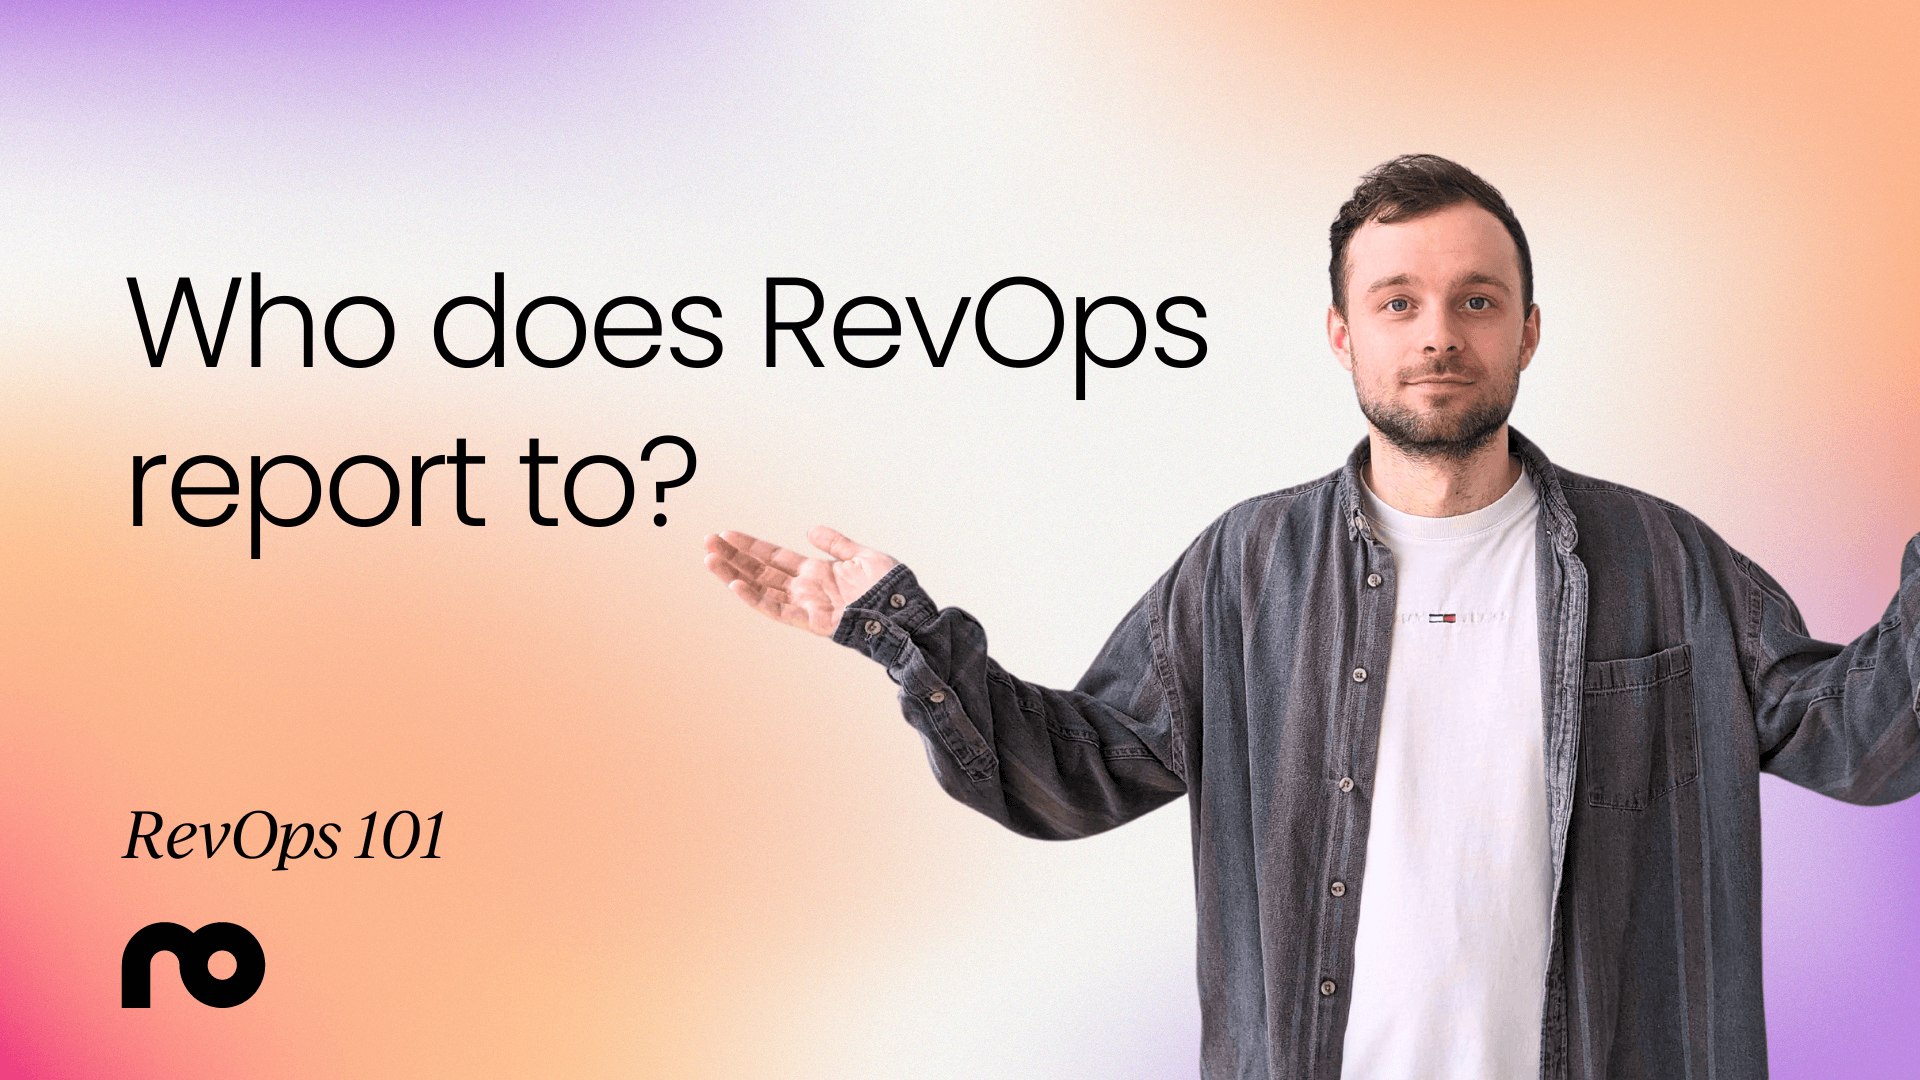 Who does RevOps report to?